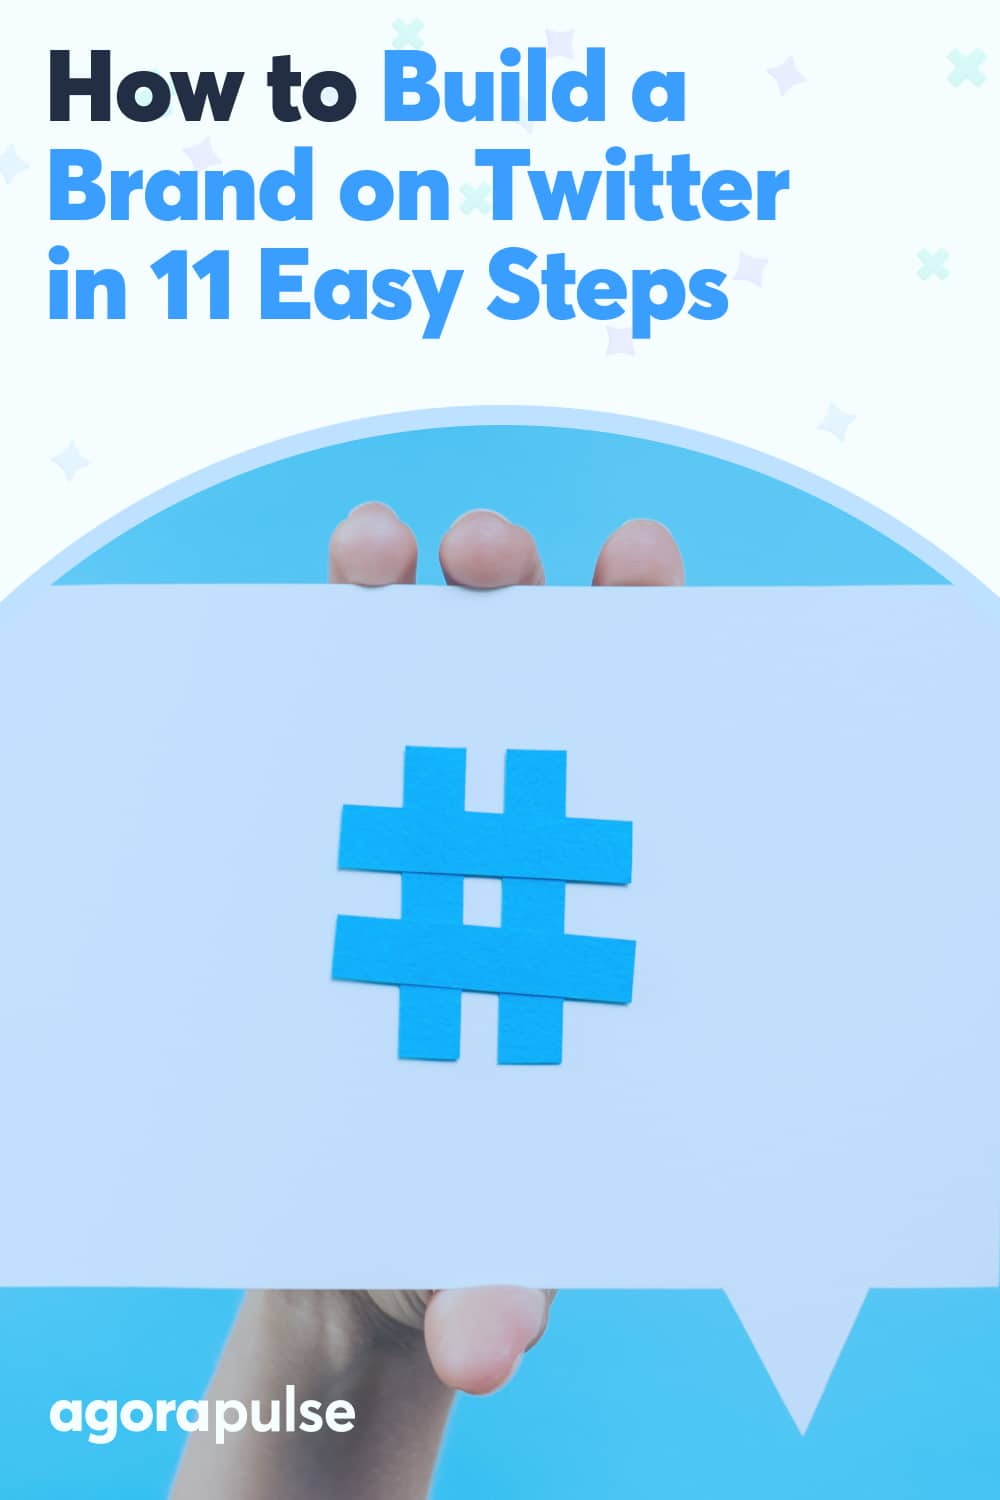 How to Build a Brand on Twitter in 11 Easy Steps